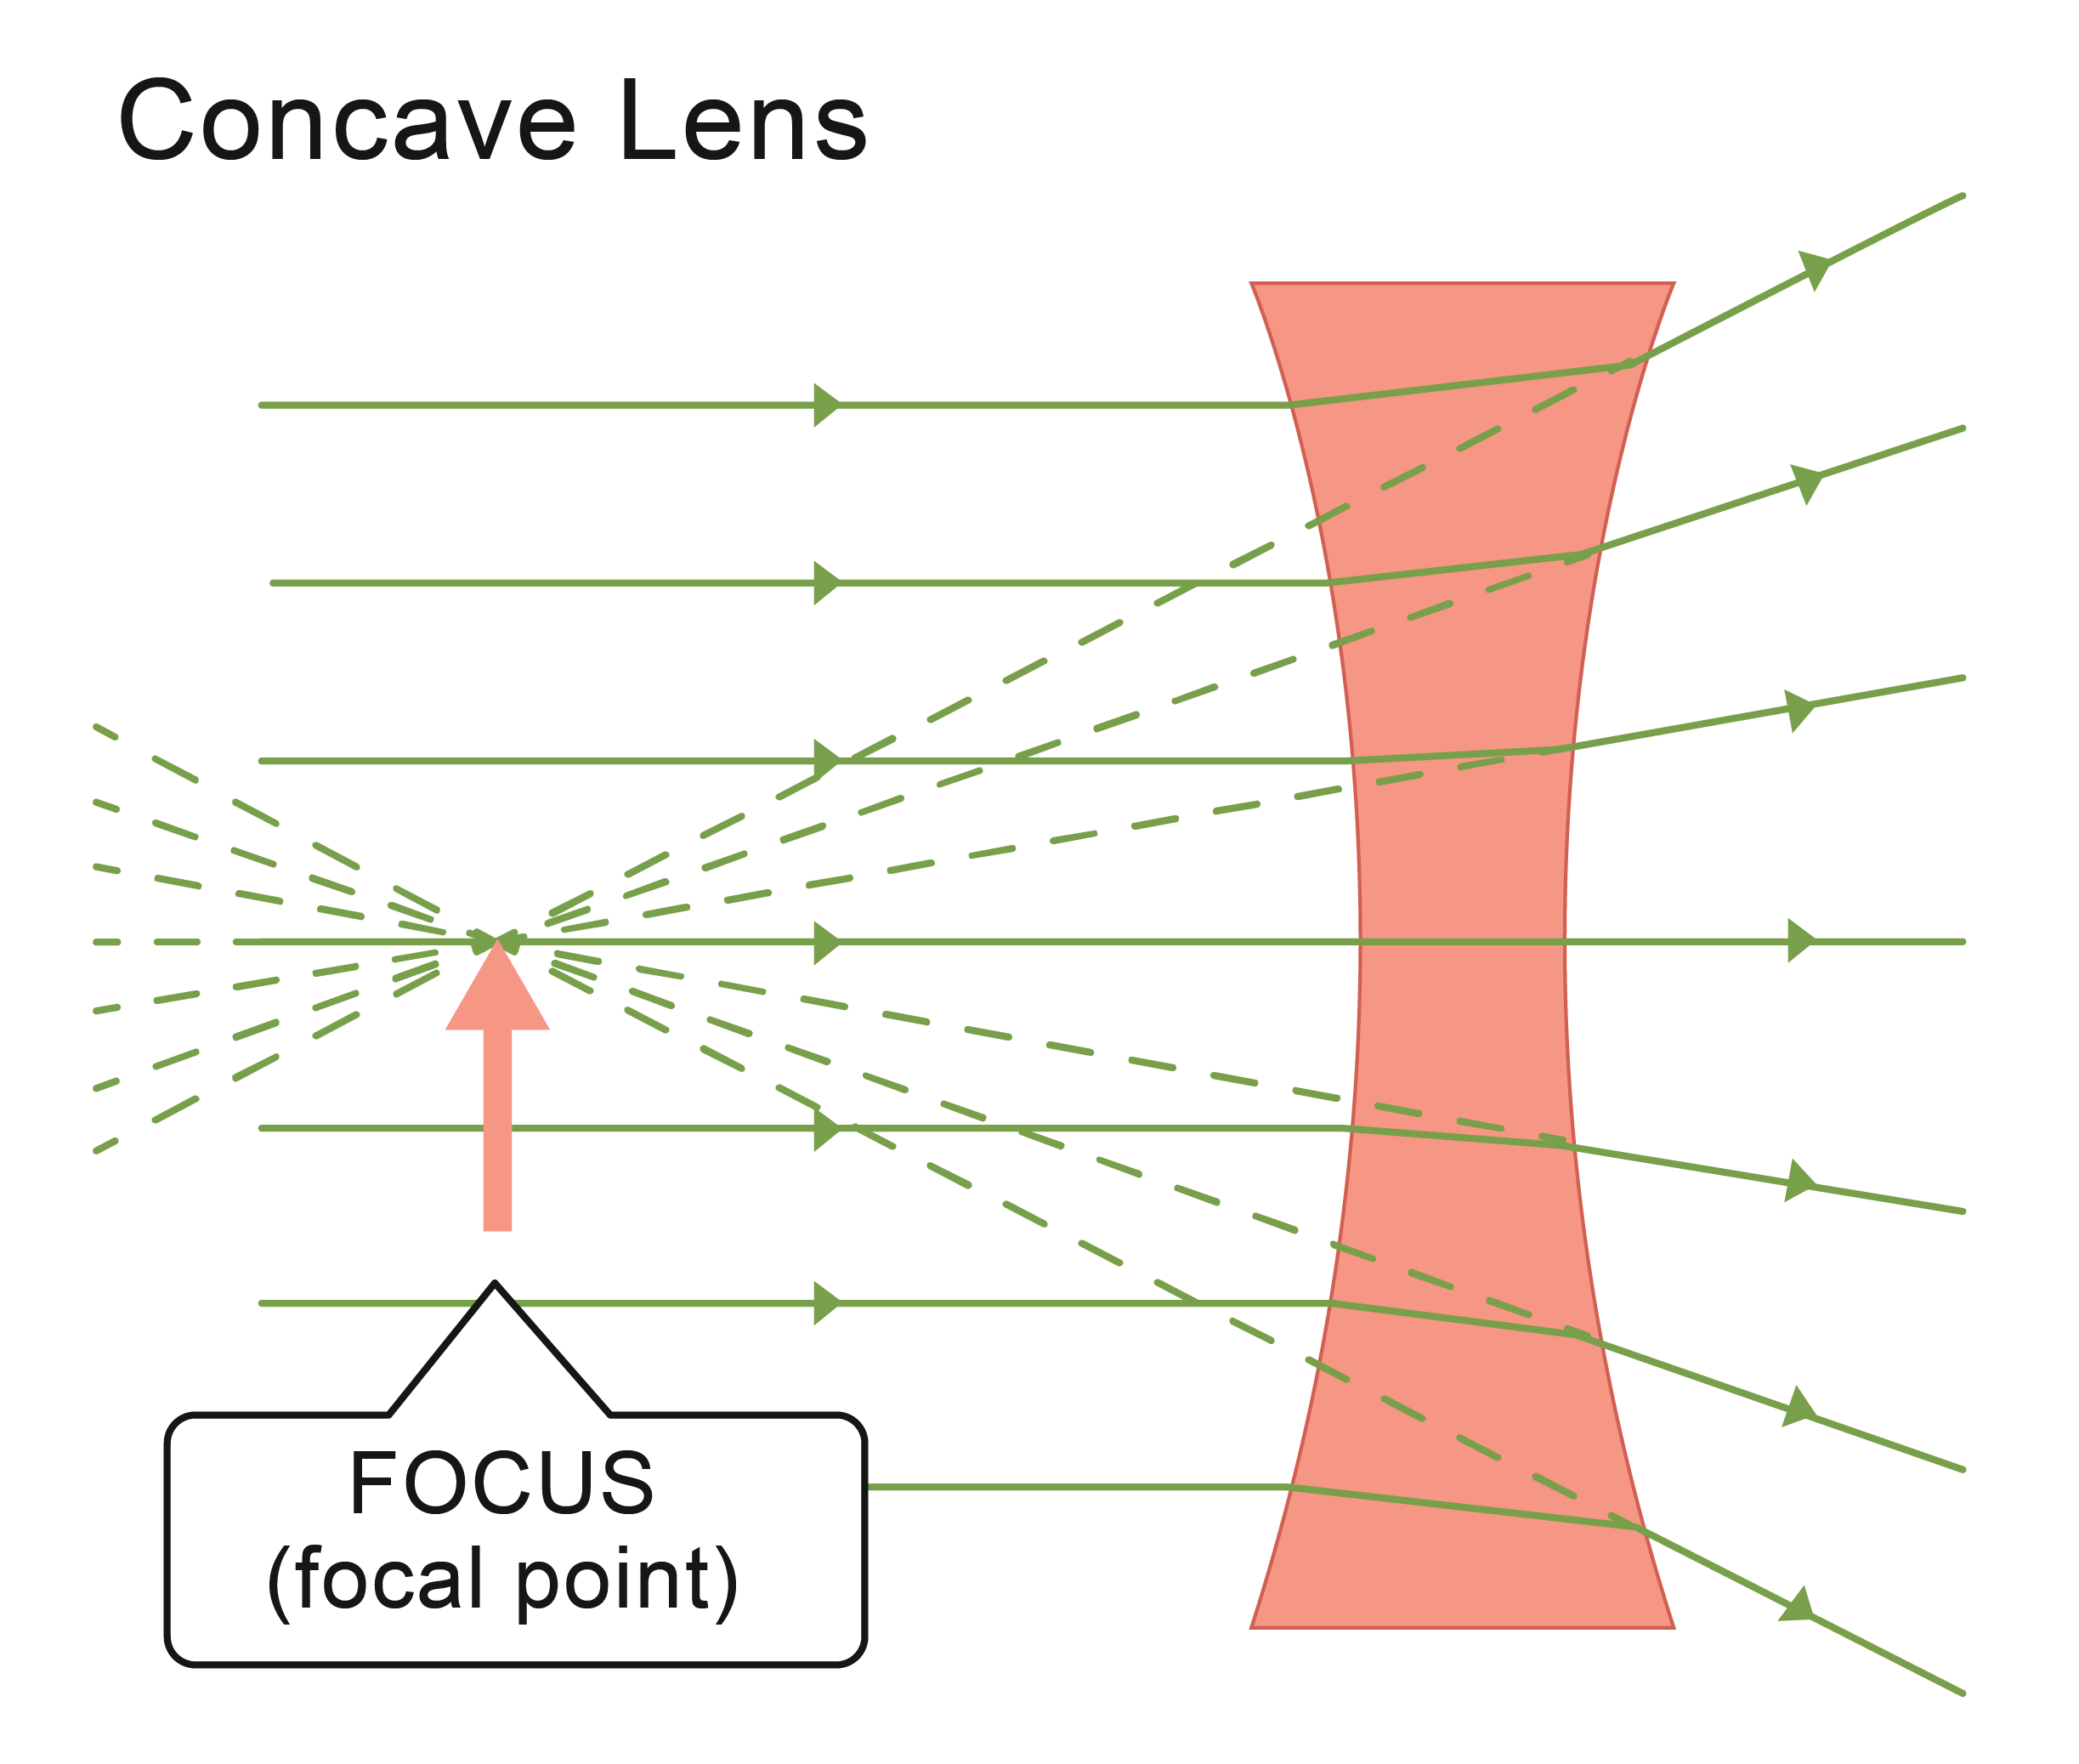 Concave lens refracting